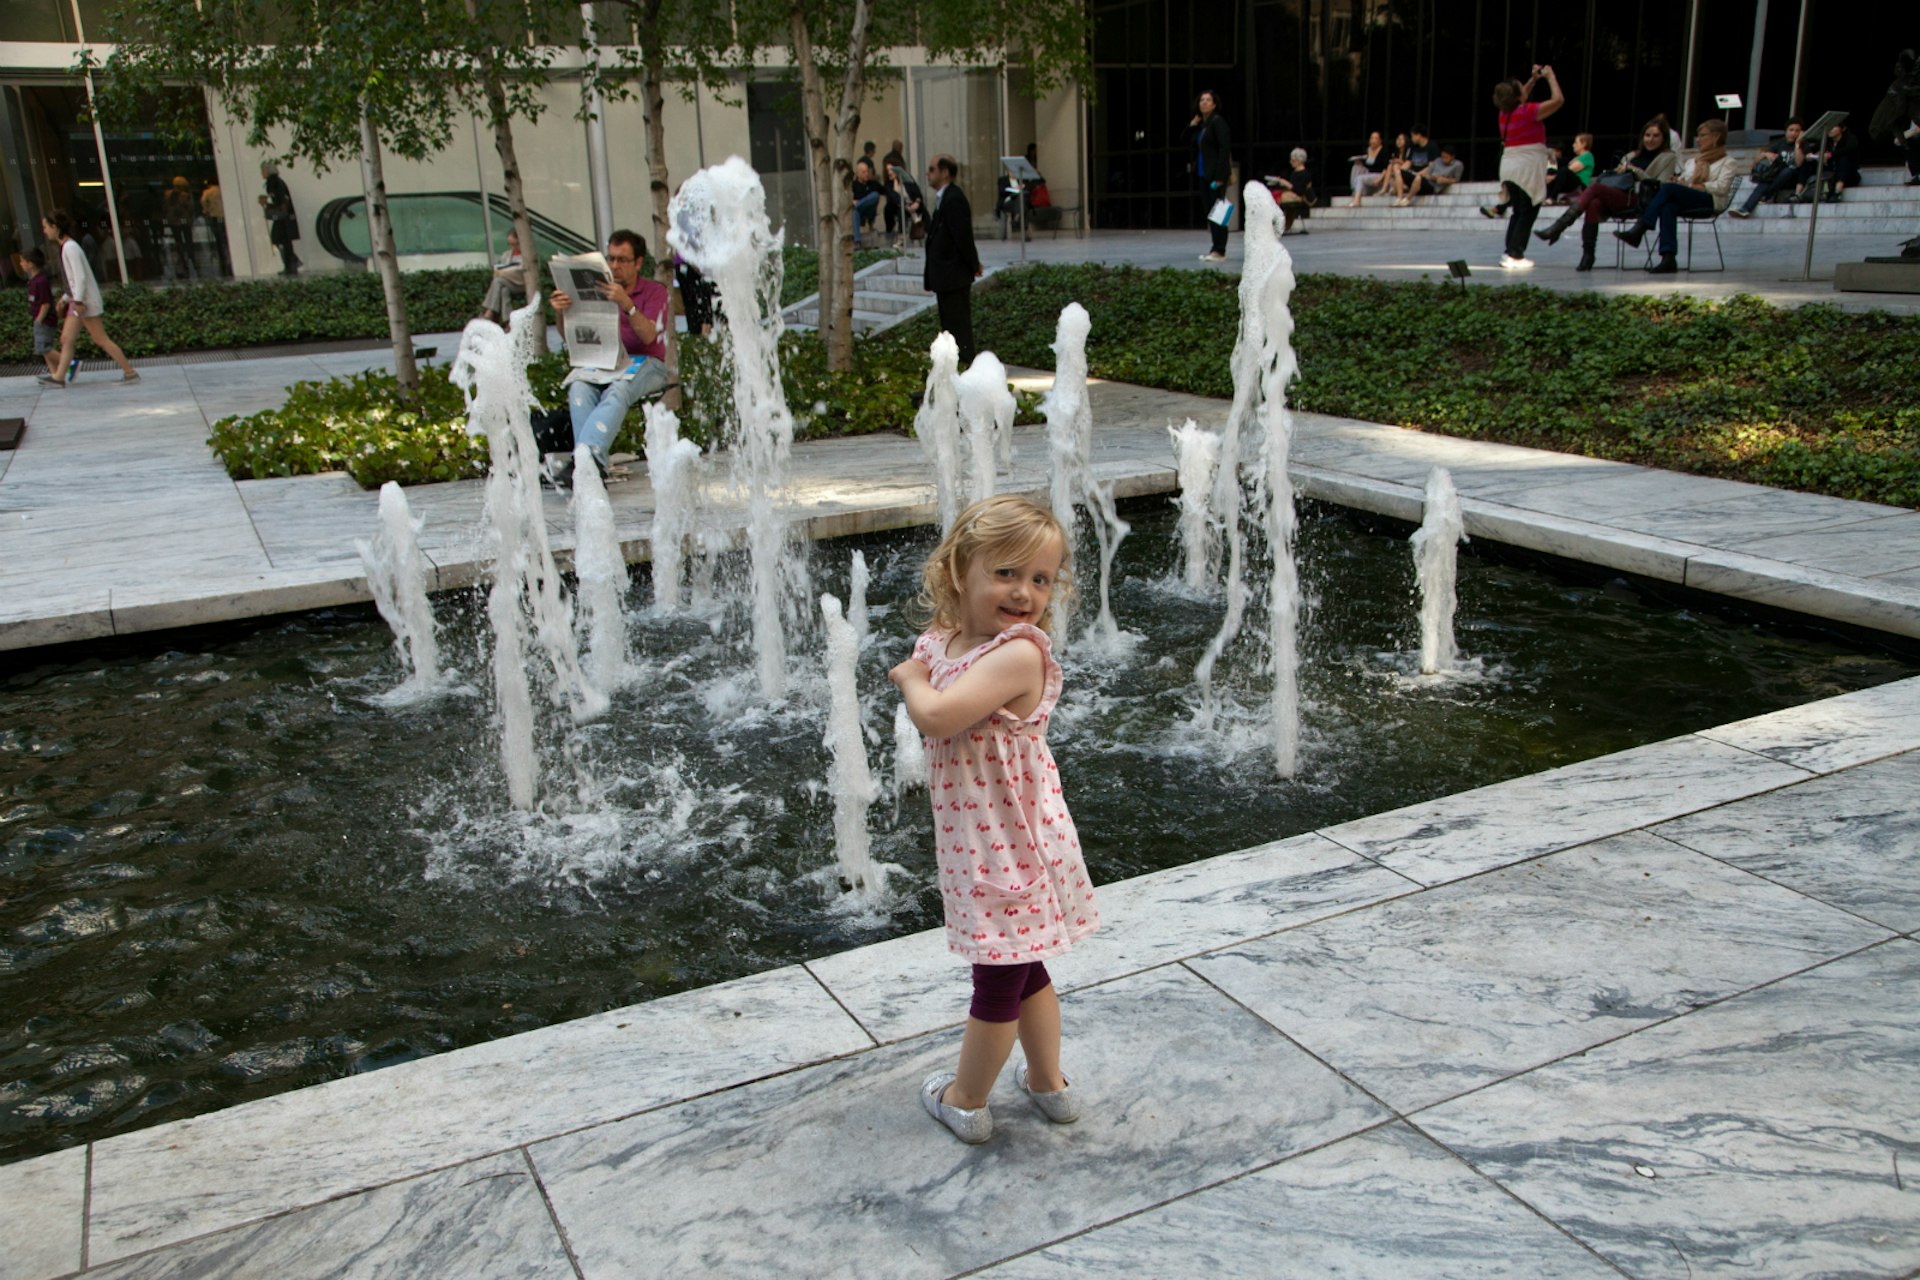 A young girl enjoys the fountain in MoMA's grounds, NYC © Christine Knight / Lonely Planet